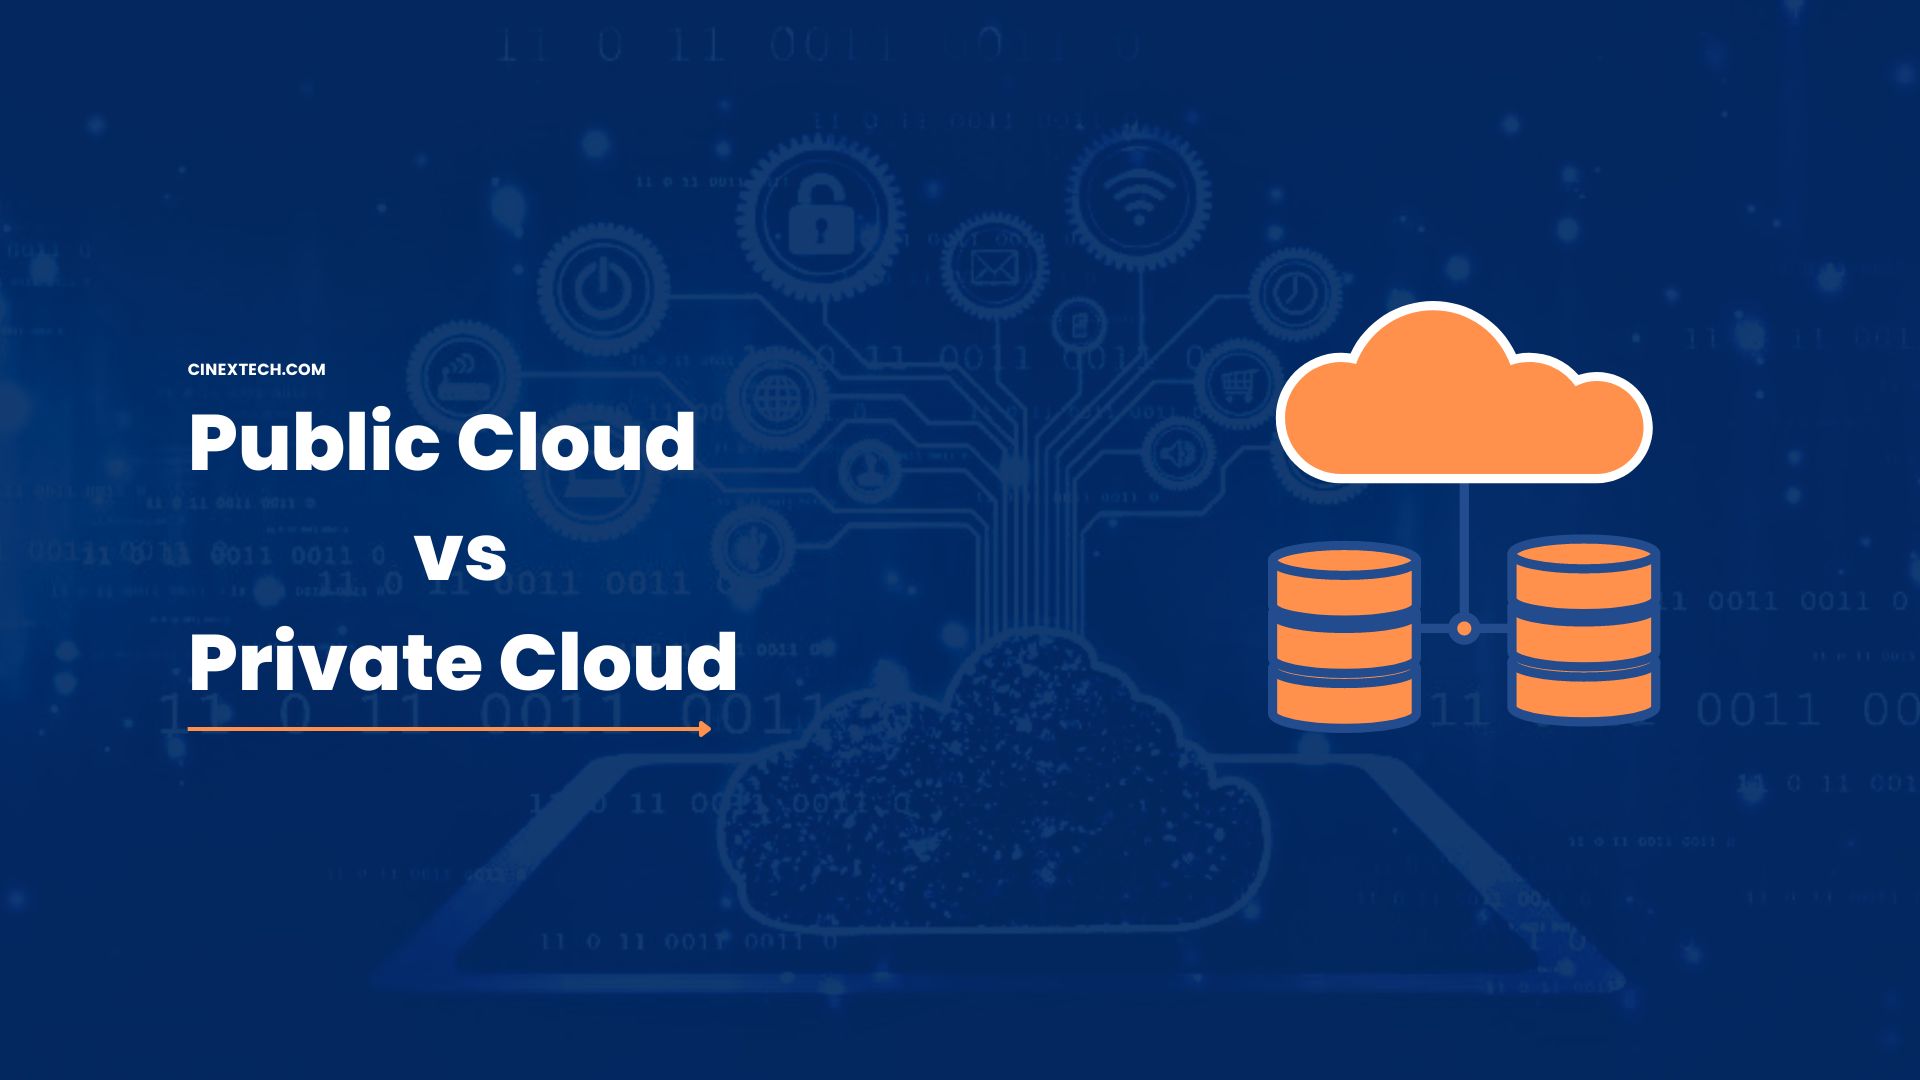 Public Cloud vs. Private Cloud: What is the Difference?